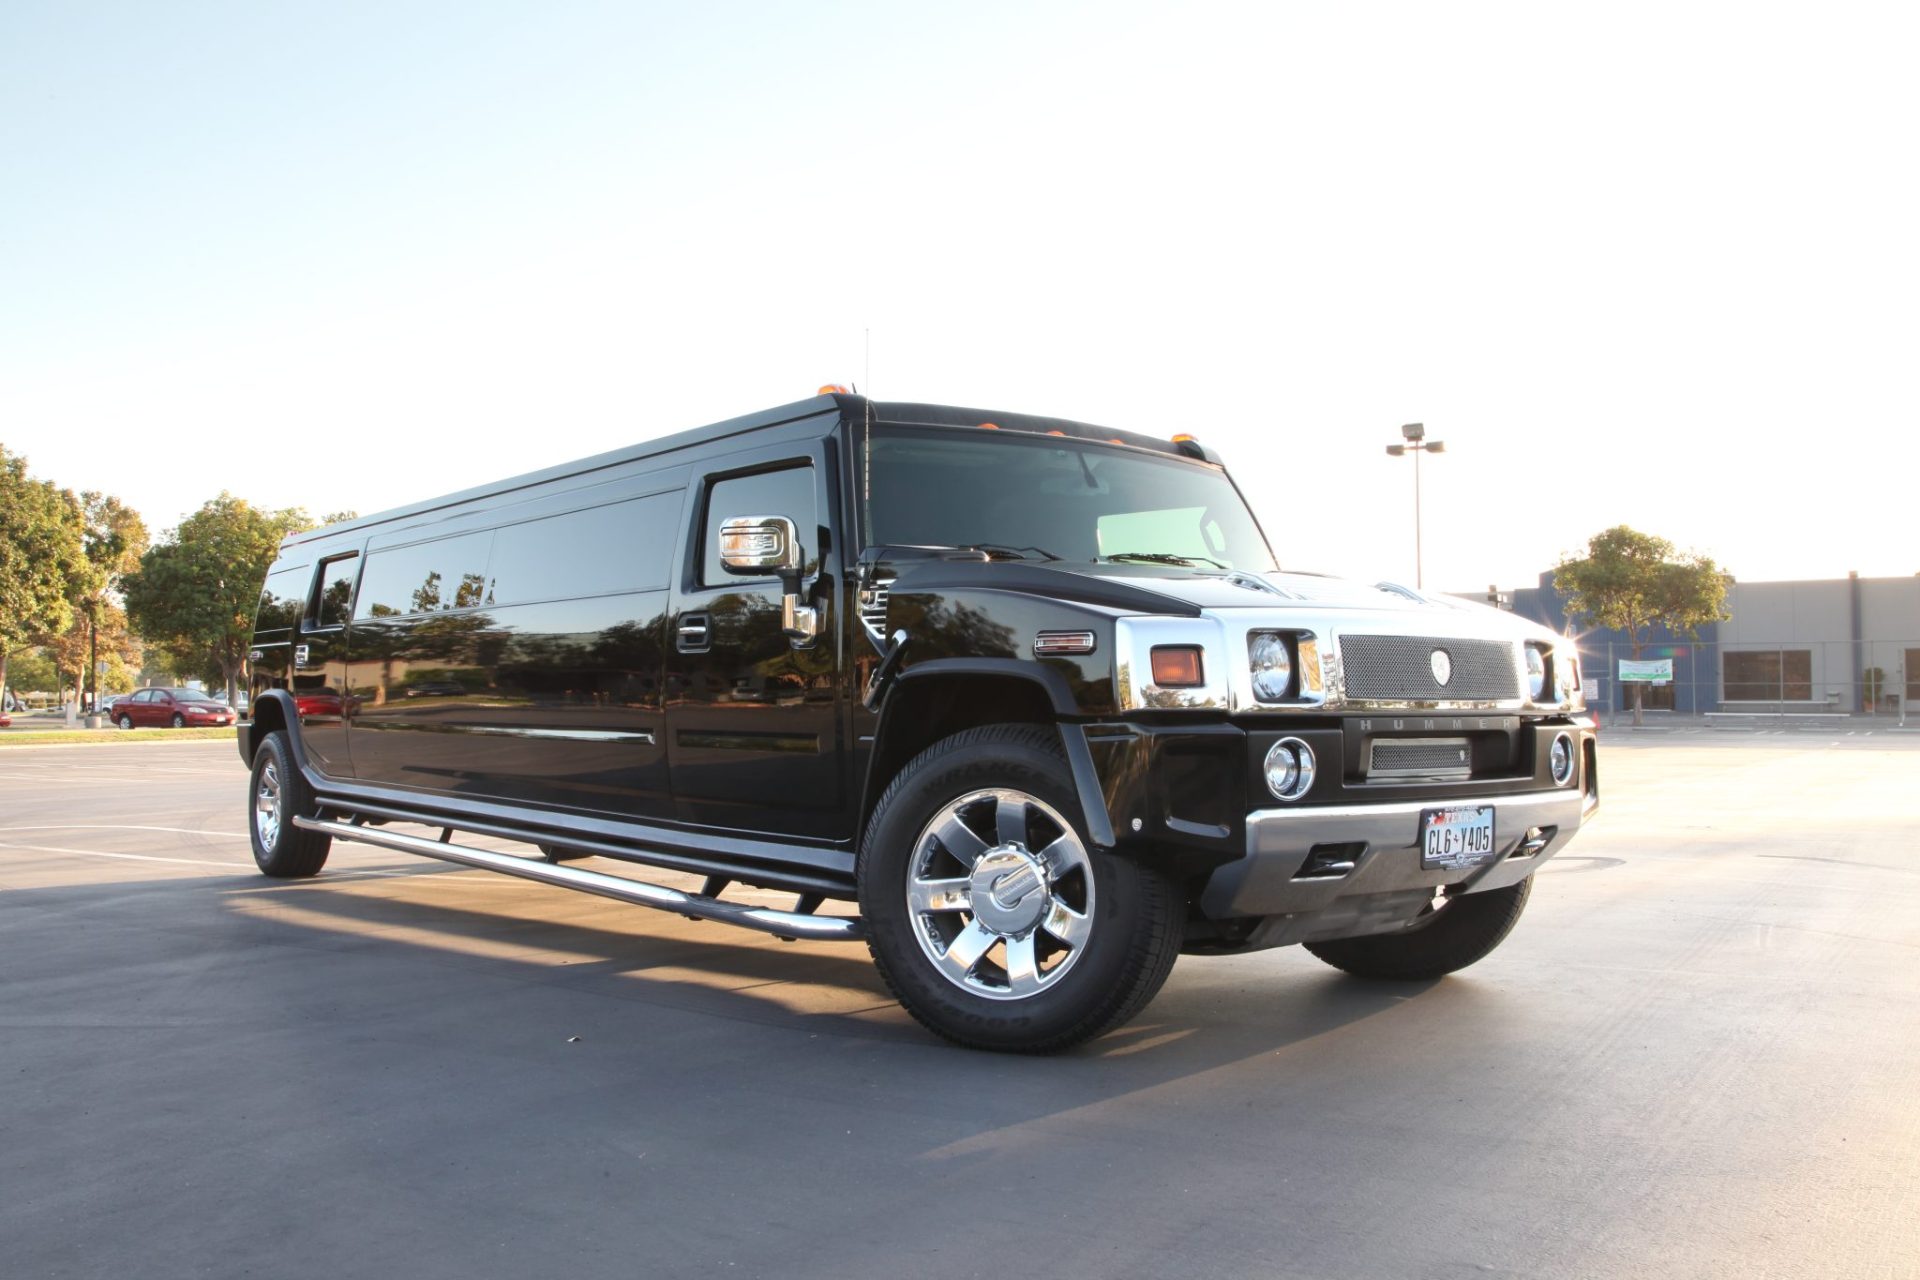 Stretched Hummer H2 CEO Mobile Office Limousine Exterior Image #1